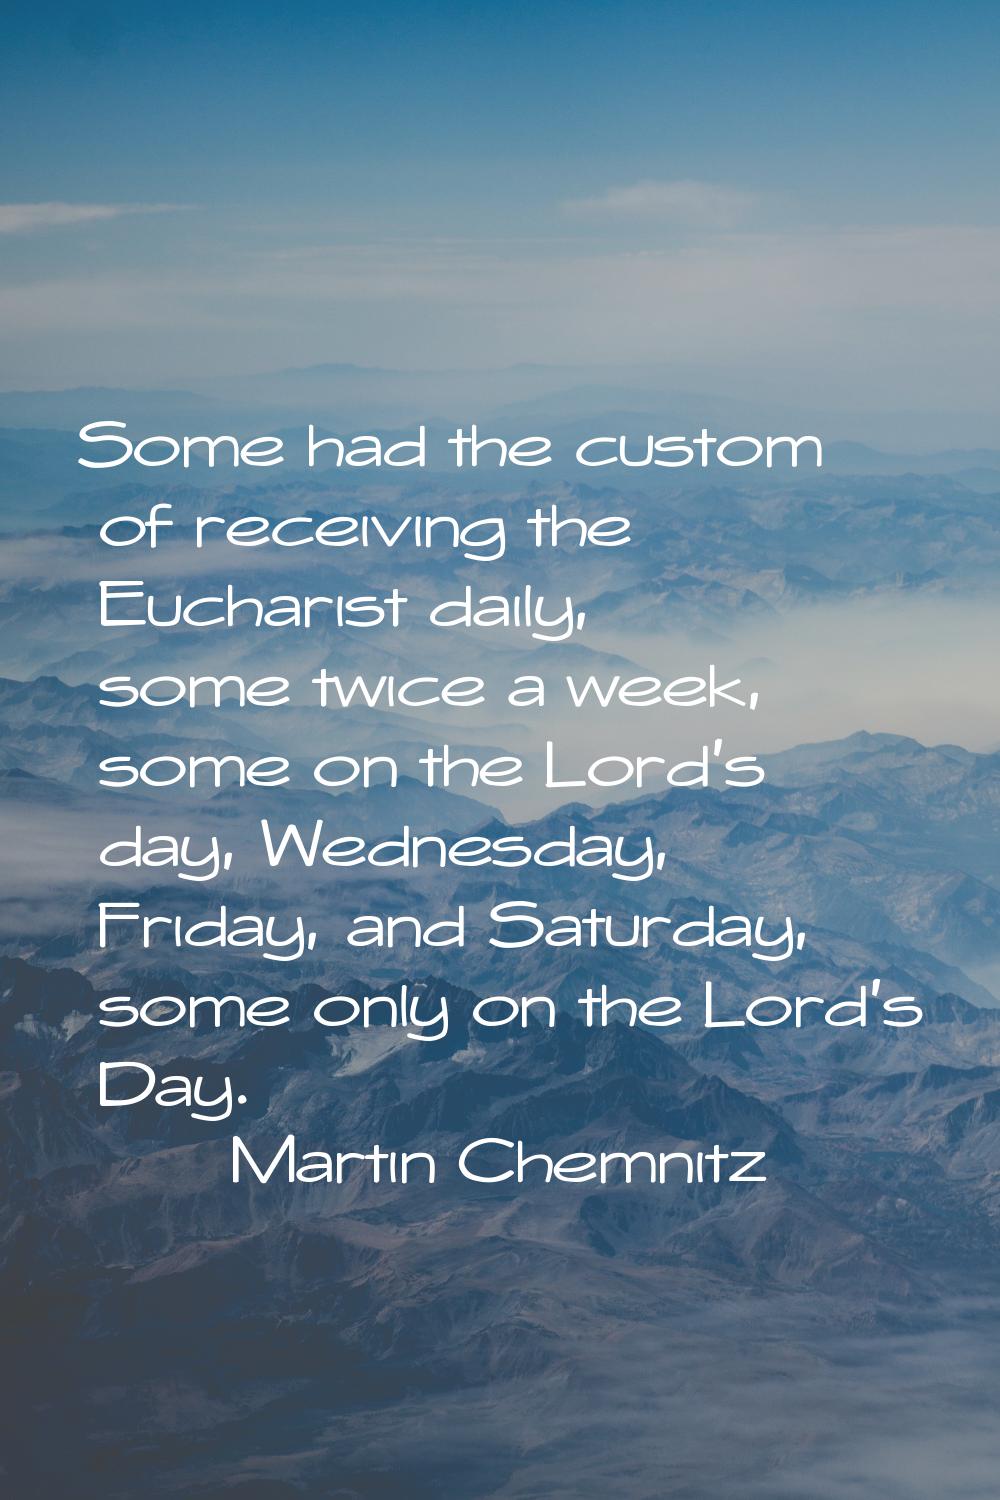 Some had the custom of receiving the Eucharist daily, some twice a week, some on the Lord's day, We